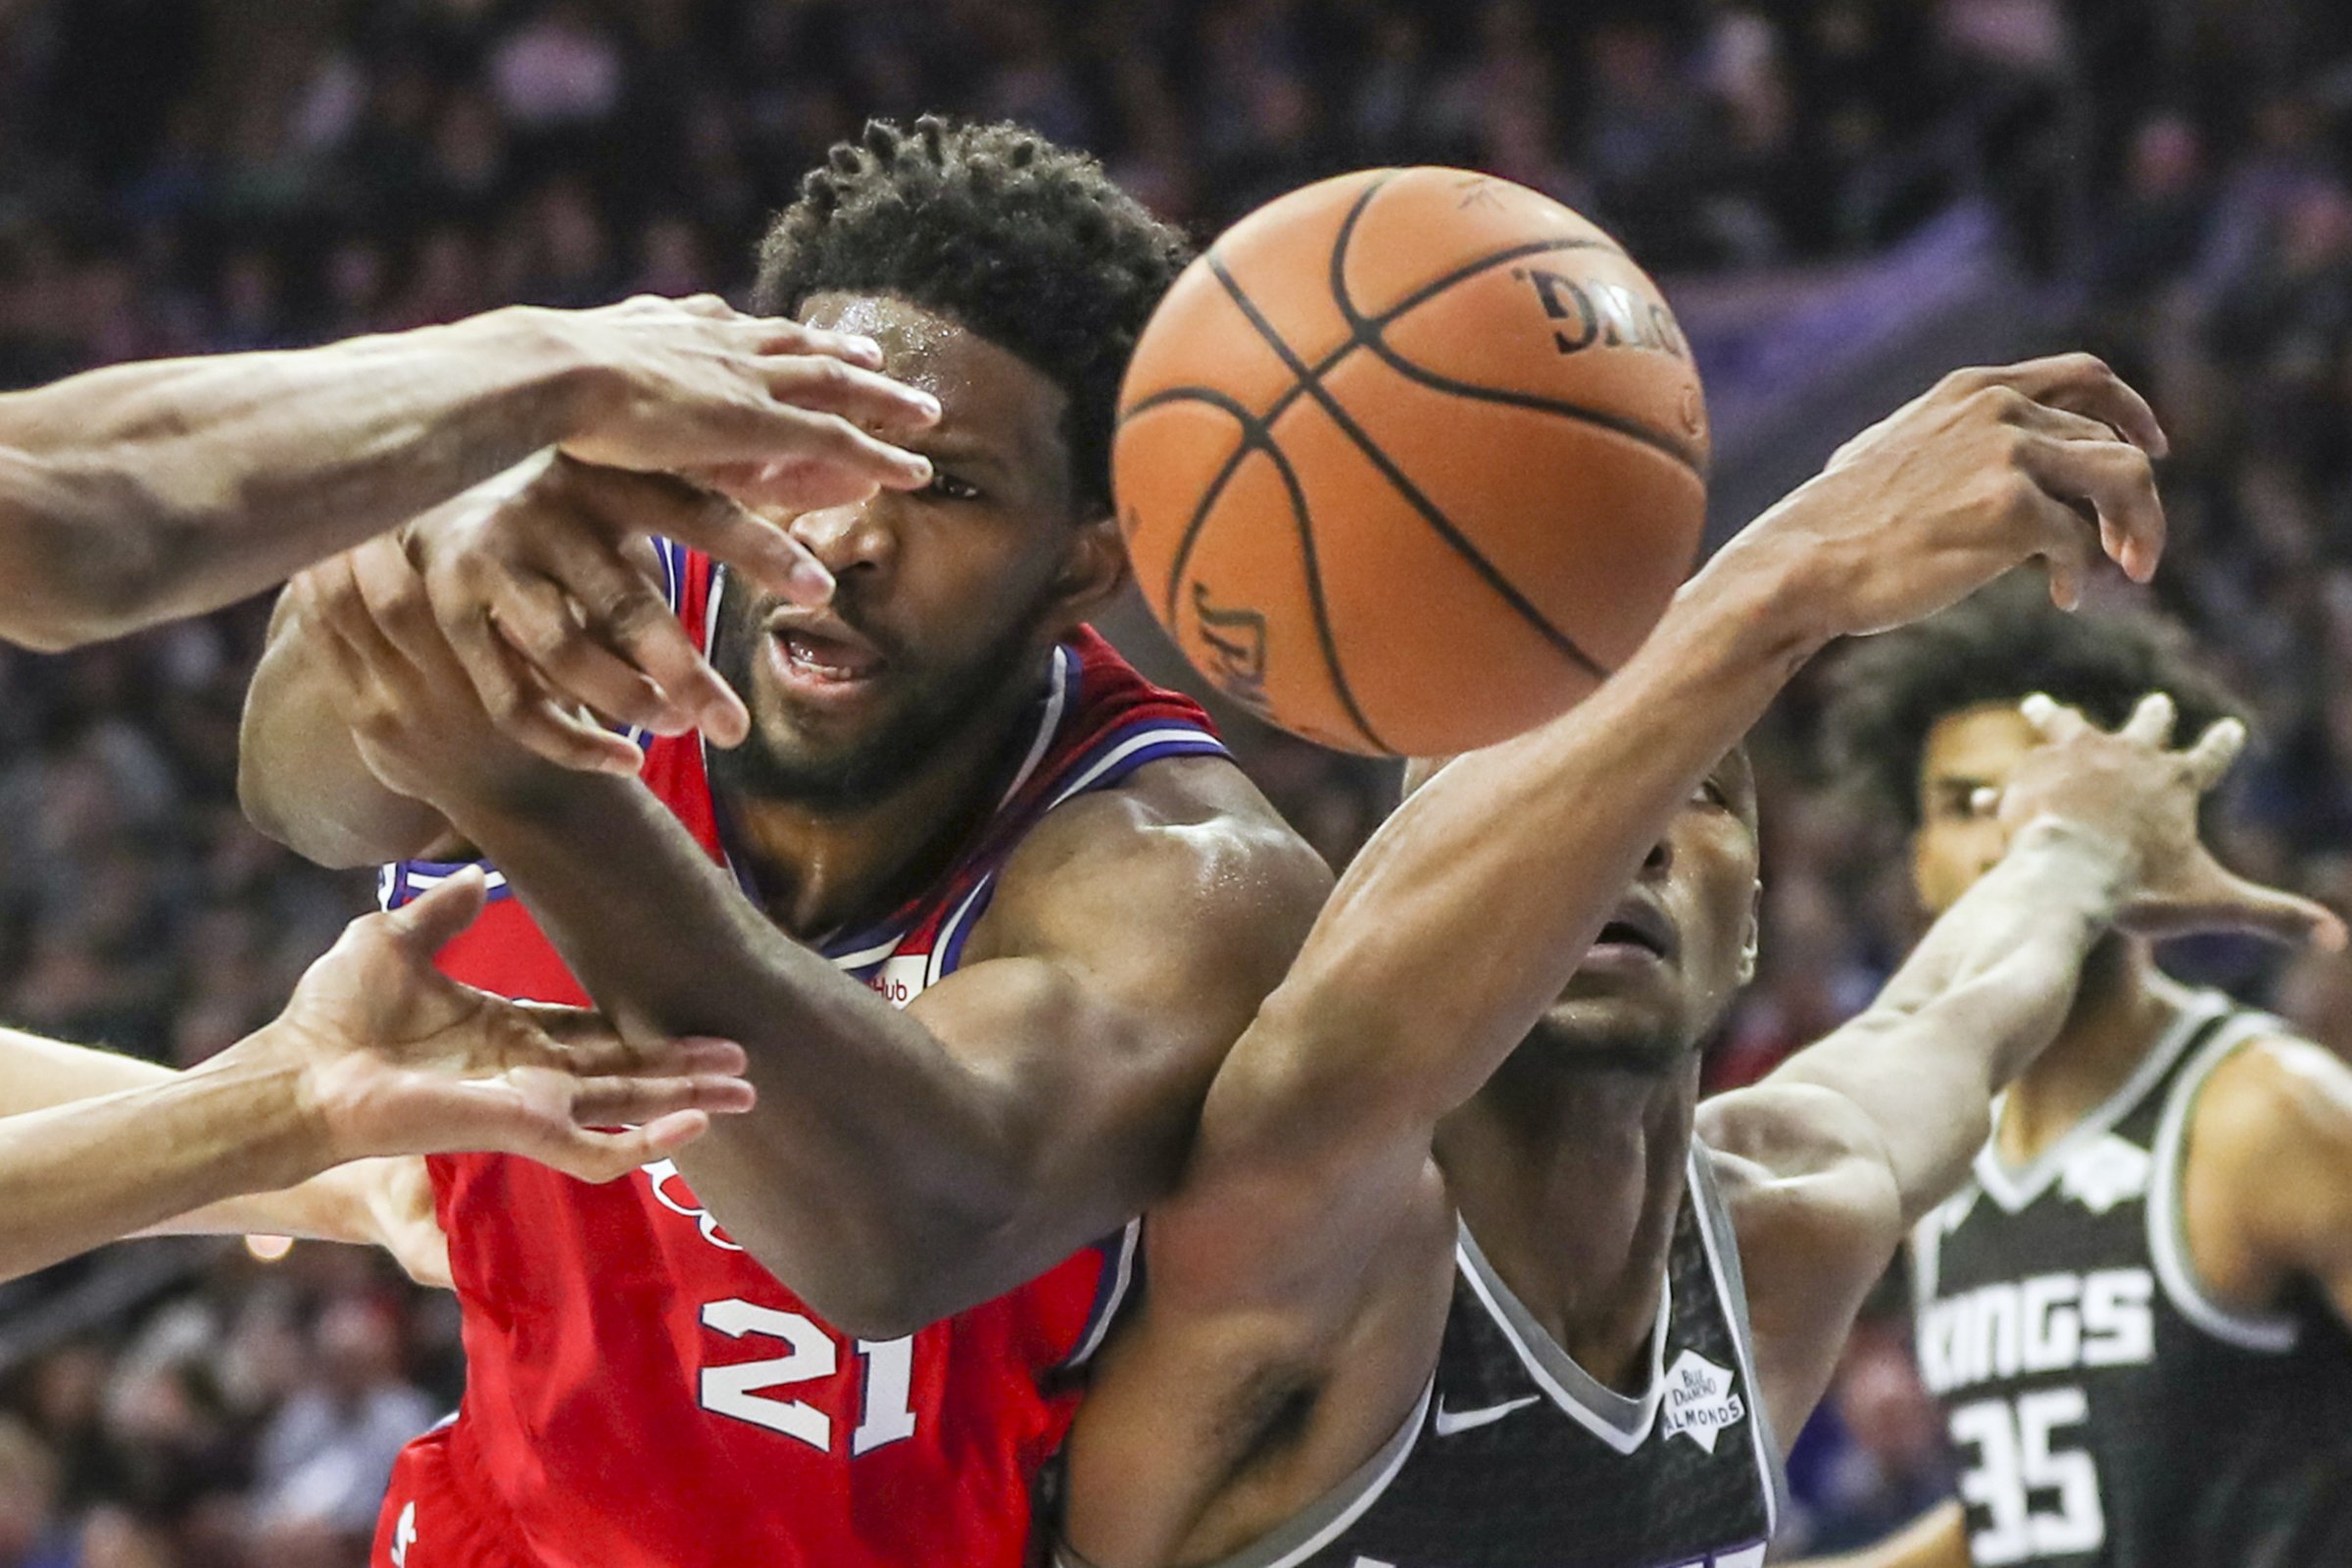  Sixers center Joel Embiid battles for an offensive rebound against Sacramento Kings’ Harry Giles III in the fourth quarter of a game at the Wells Fargo Center in Philadelphia on March 15, 2019. 